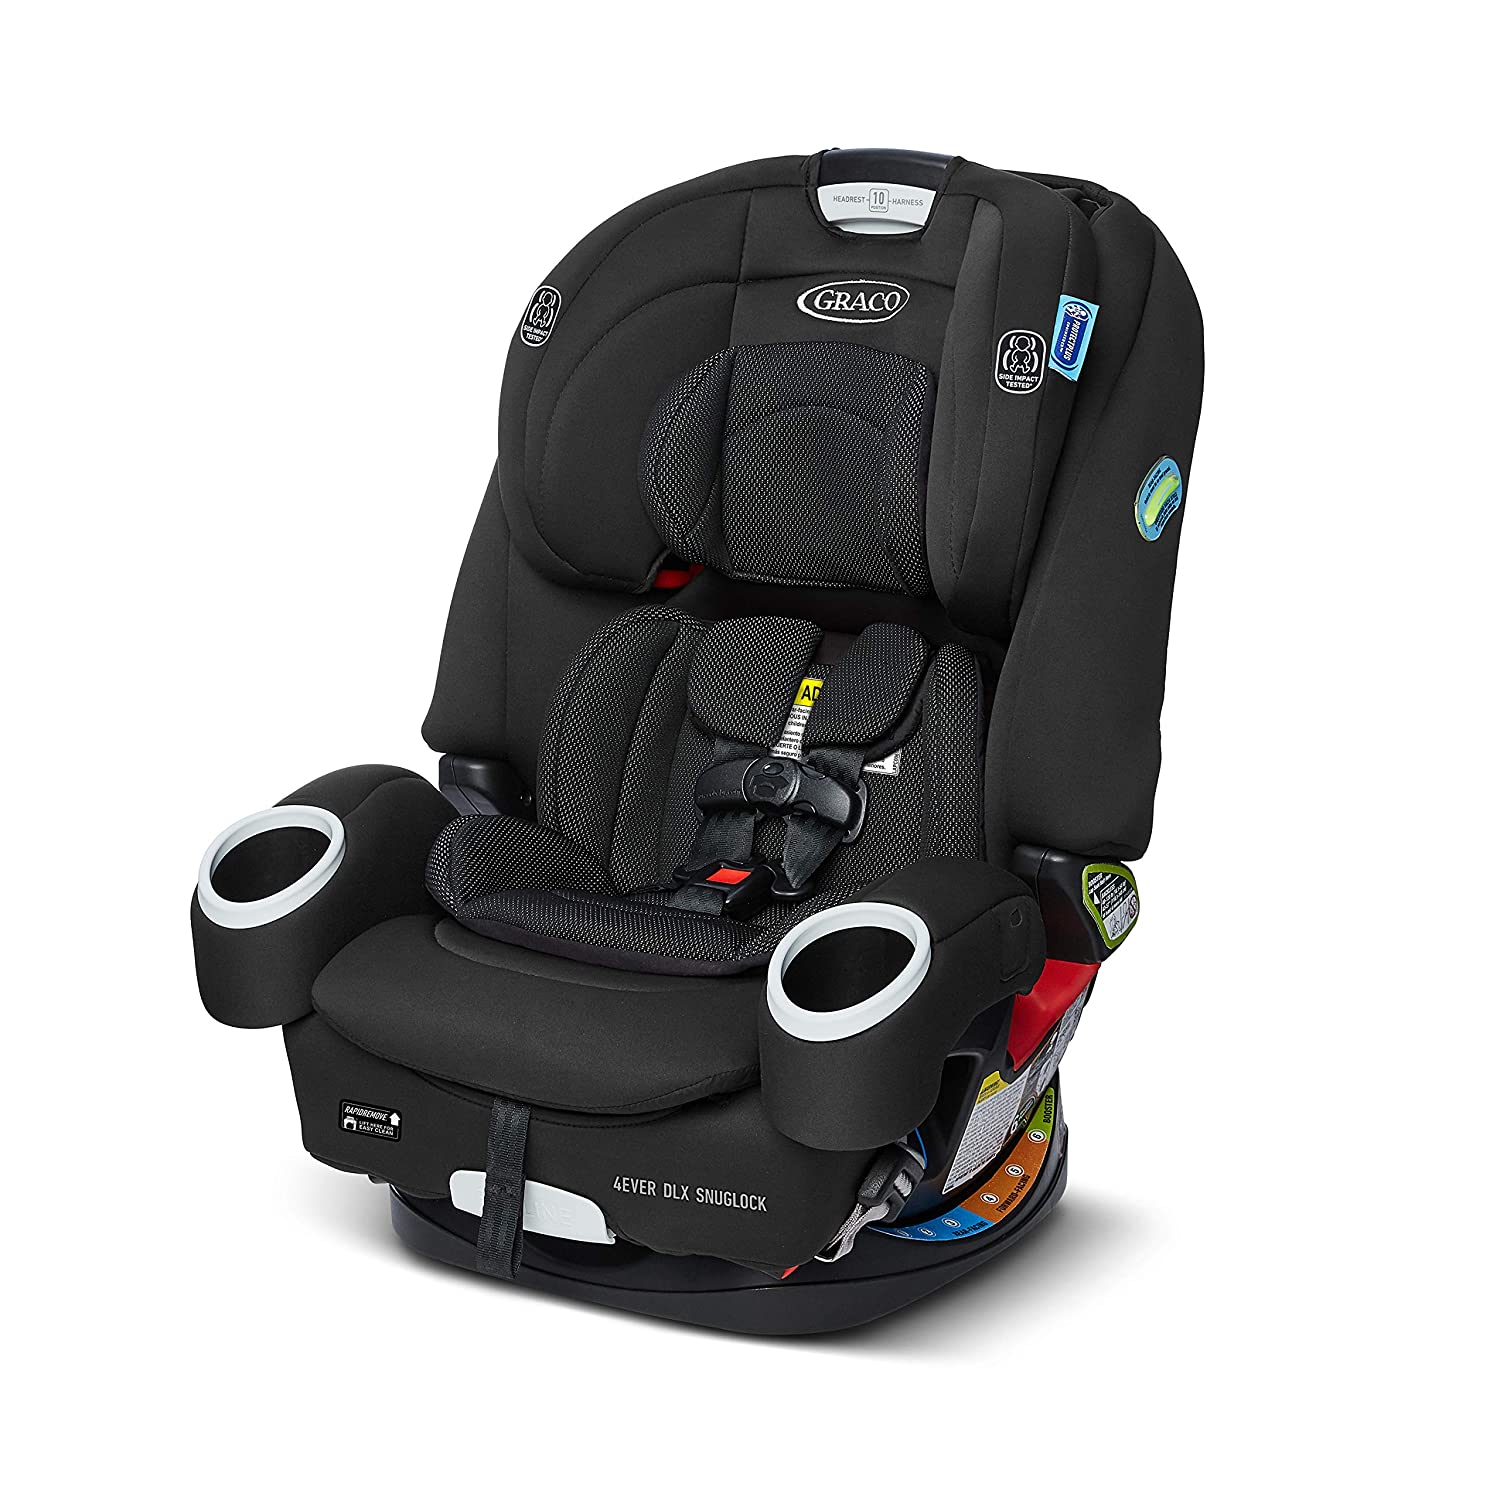 GRACO 4Ever DLX SnugLock 4 in 1 Car Seat Infant to Toddler